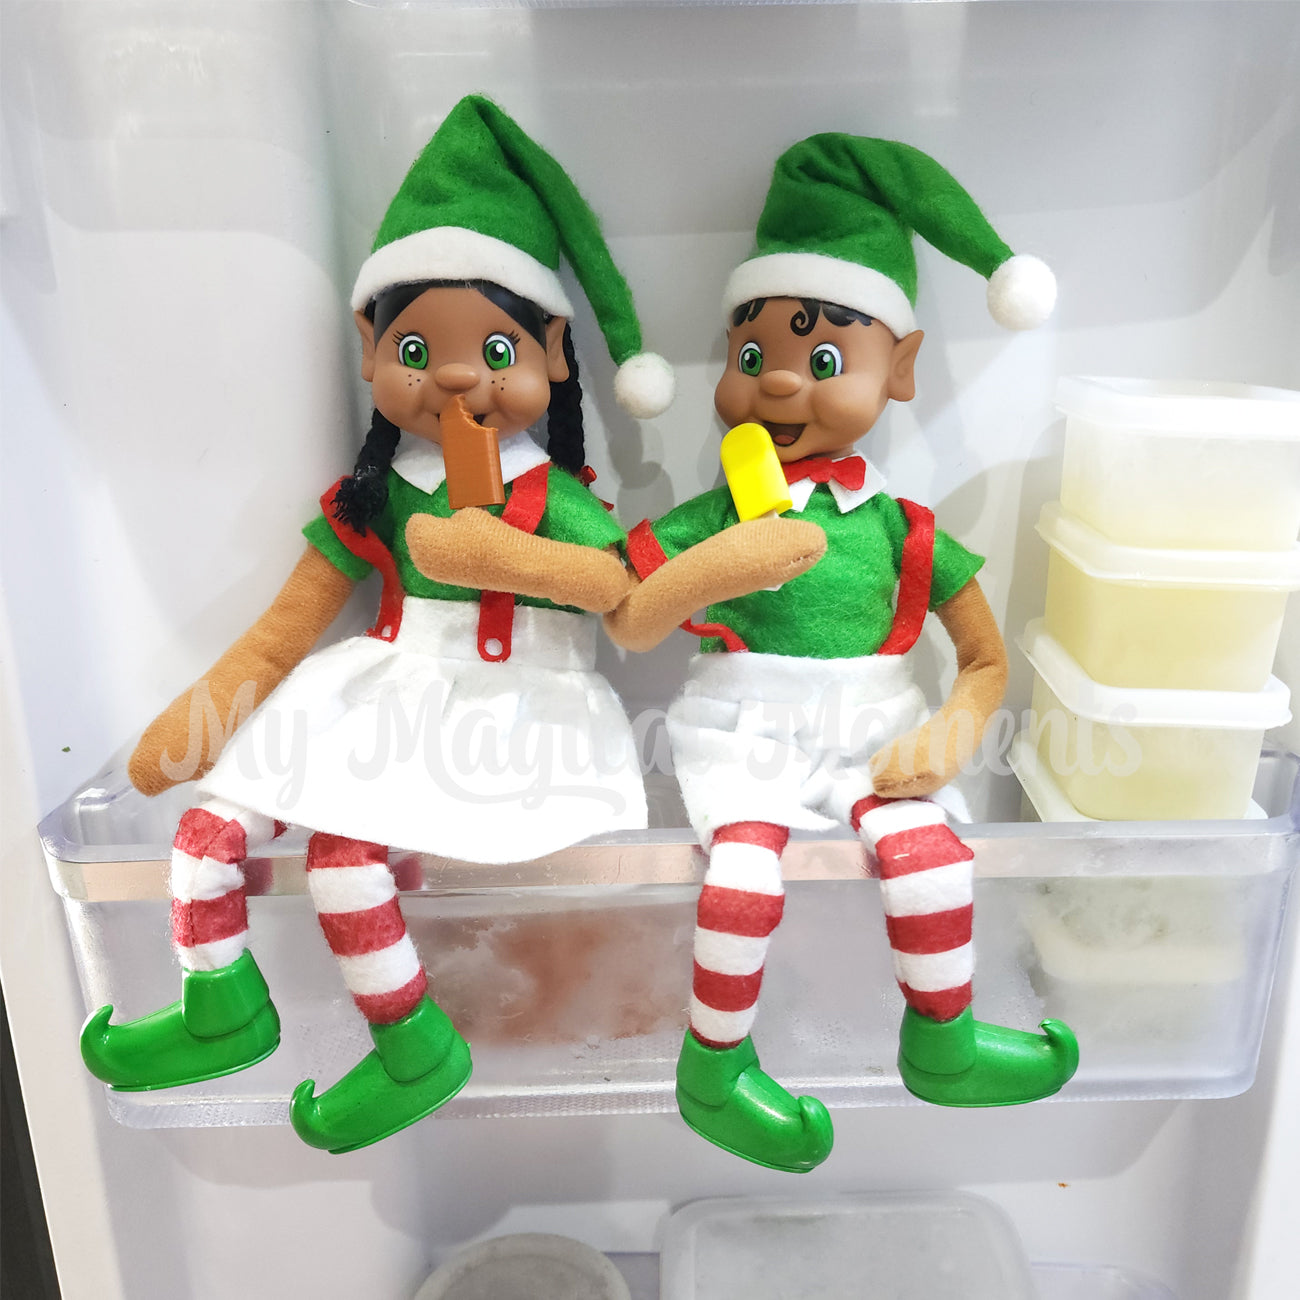 Two elves sitting in a freezer eating mini paddle pop ice creams